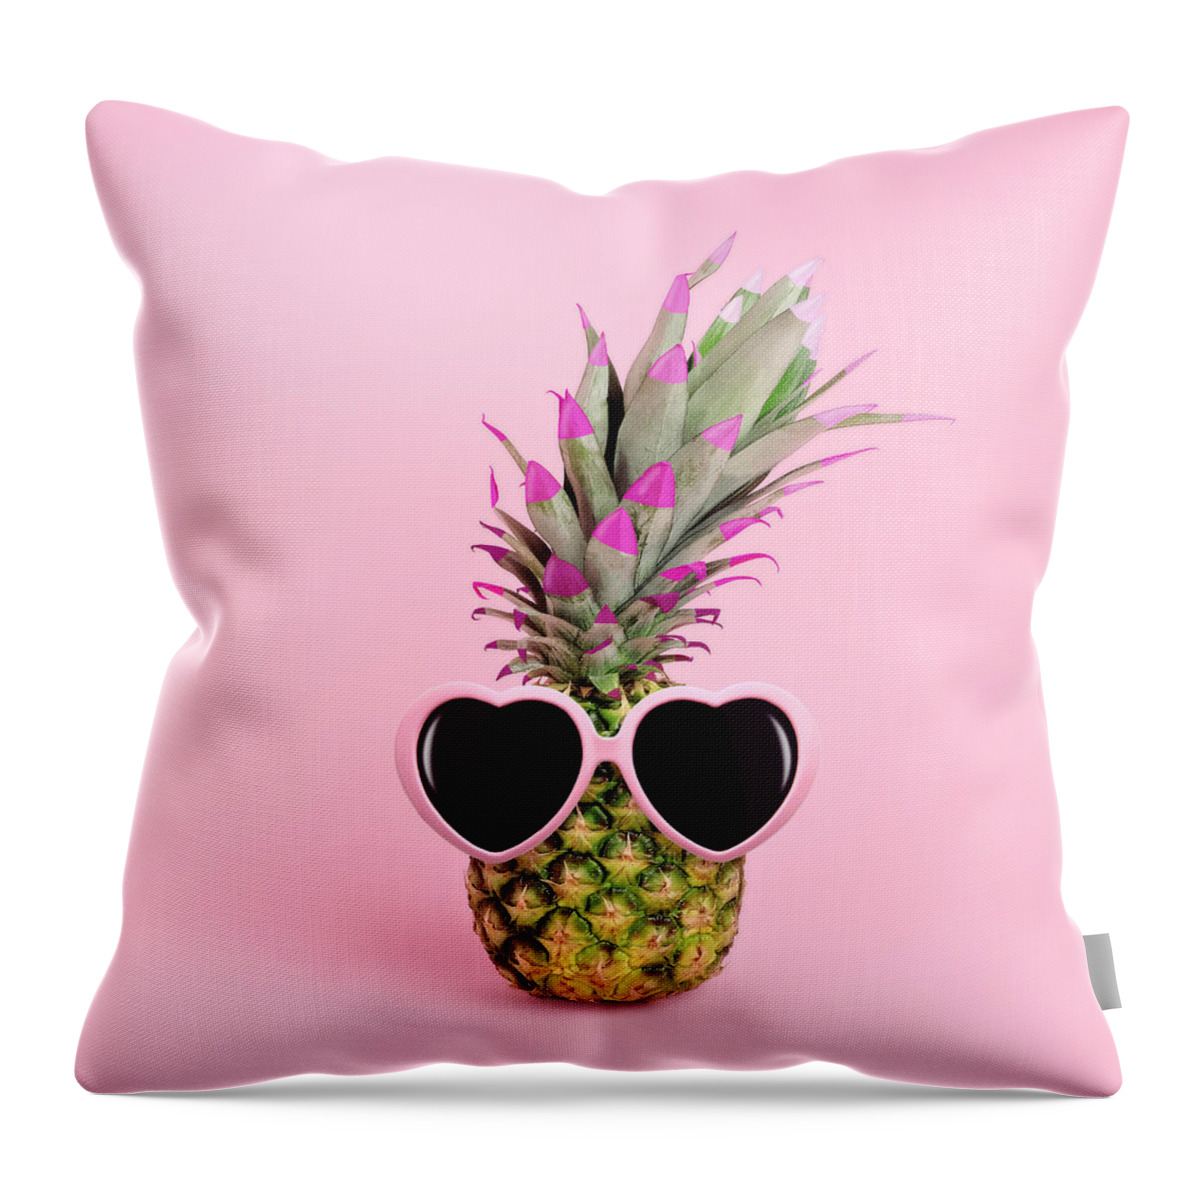 Food Throw Pillow featuring the photograph Pineapple Wearing Sunglasses by Juj Winn